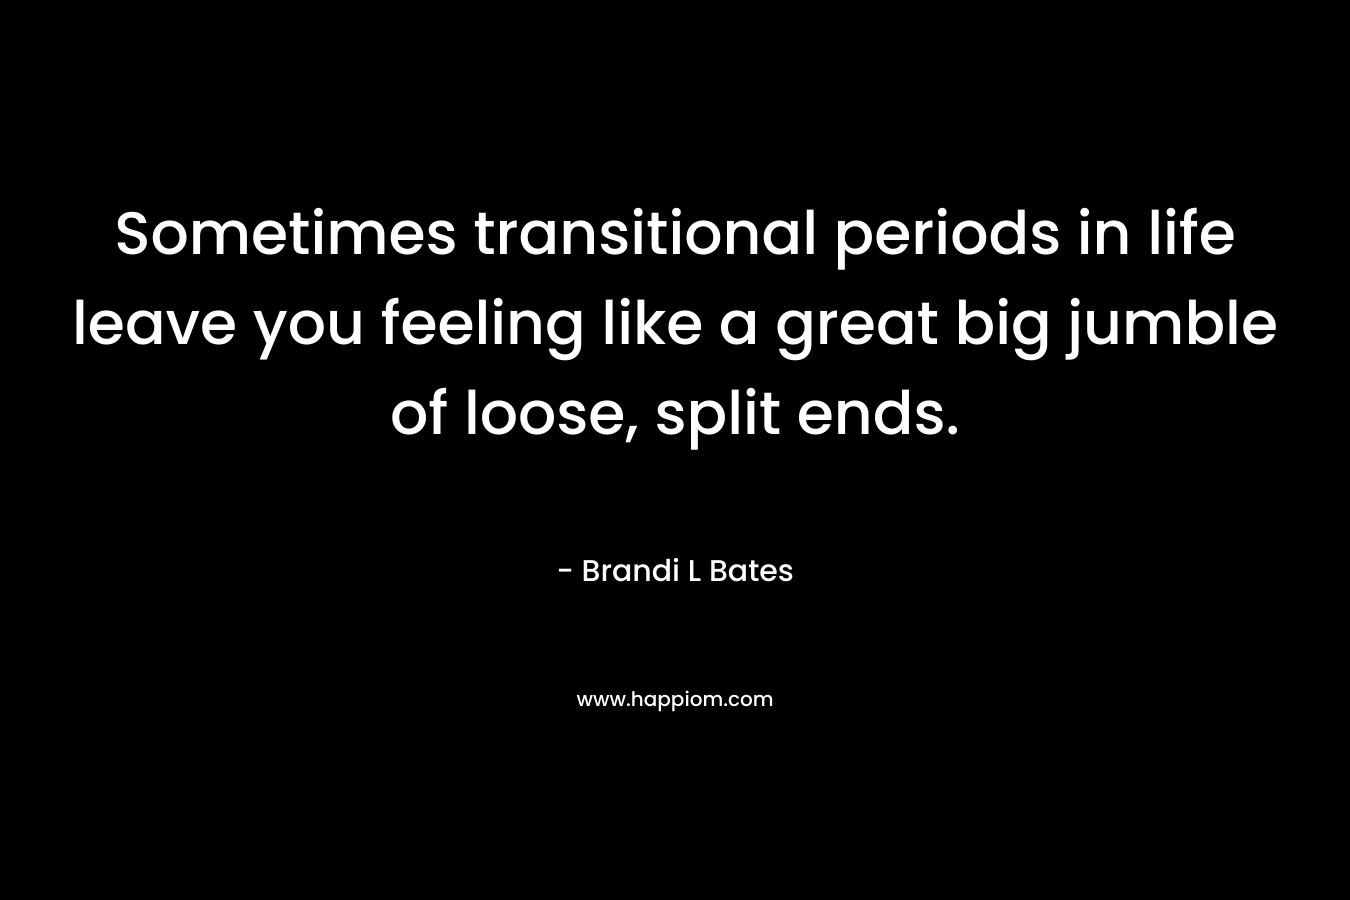 Sometimes transitional periods in life leave you feeling like a great big jumble of loose, split ends.